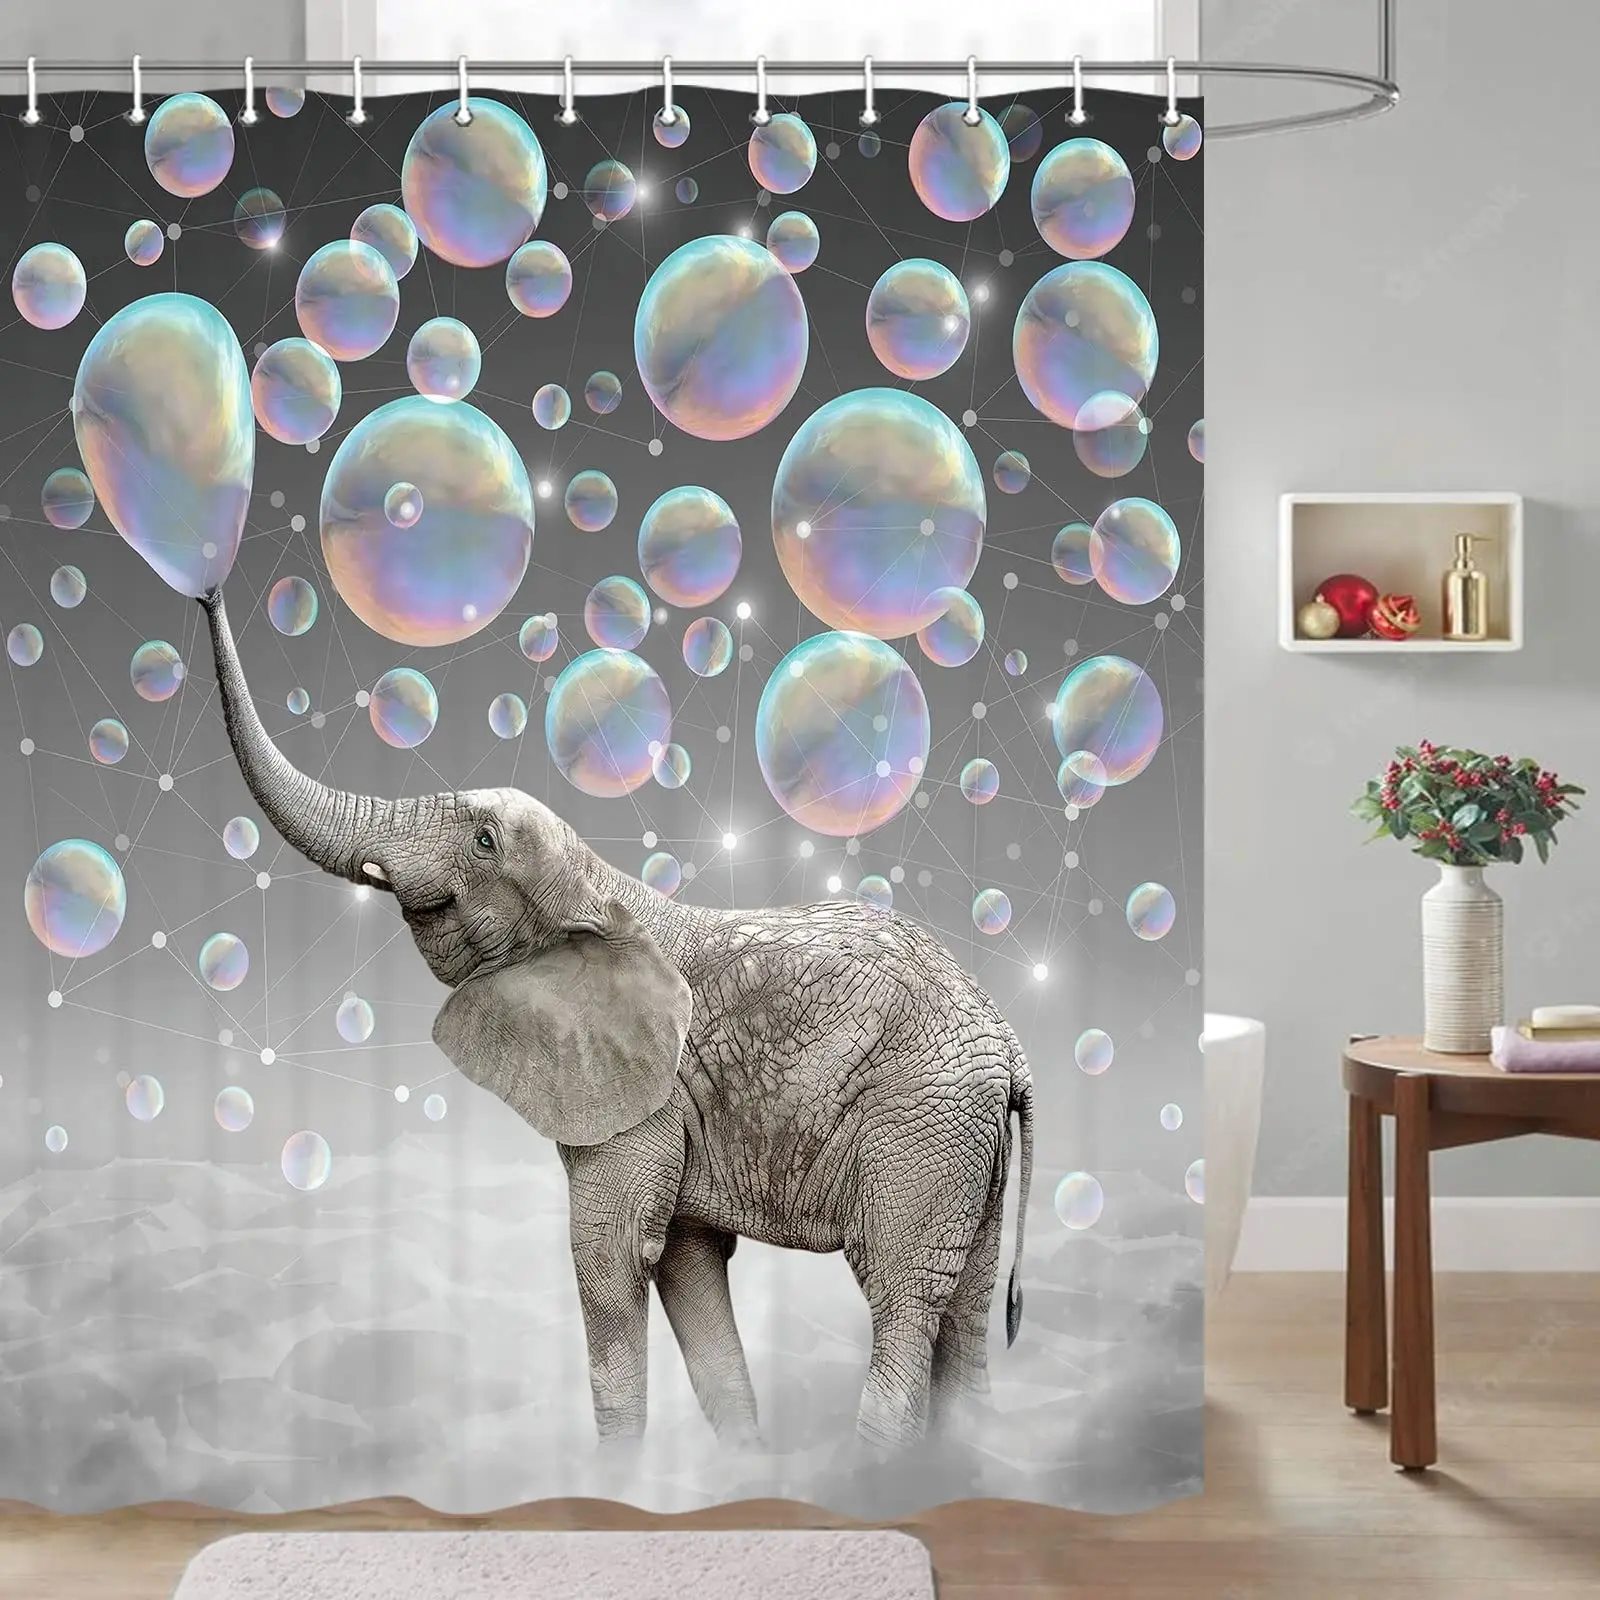 

Funny Elephant Shower Curtain,Cute Blowing Bubbles Elephant Bathroom Curtains Set Waterproof Durable Polyester Fabric with Hooks